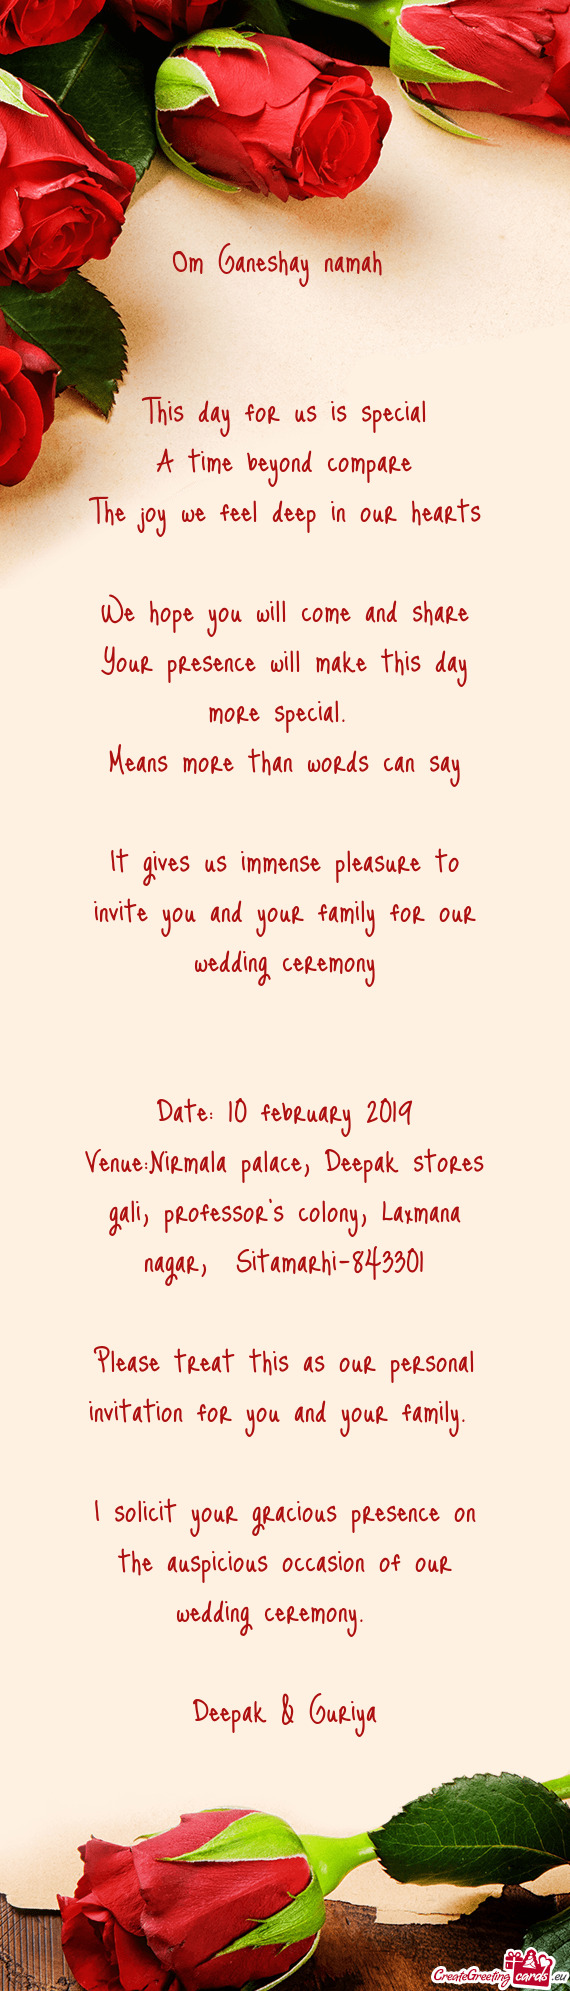 It gives us immense pleasure to invite you and your family for our wedding ceremony